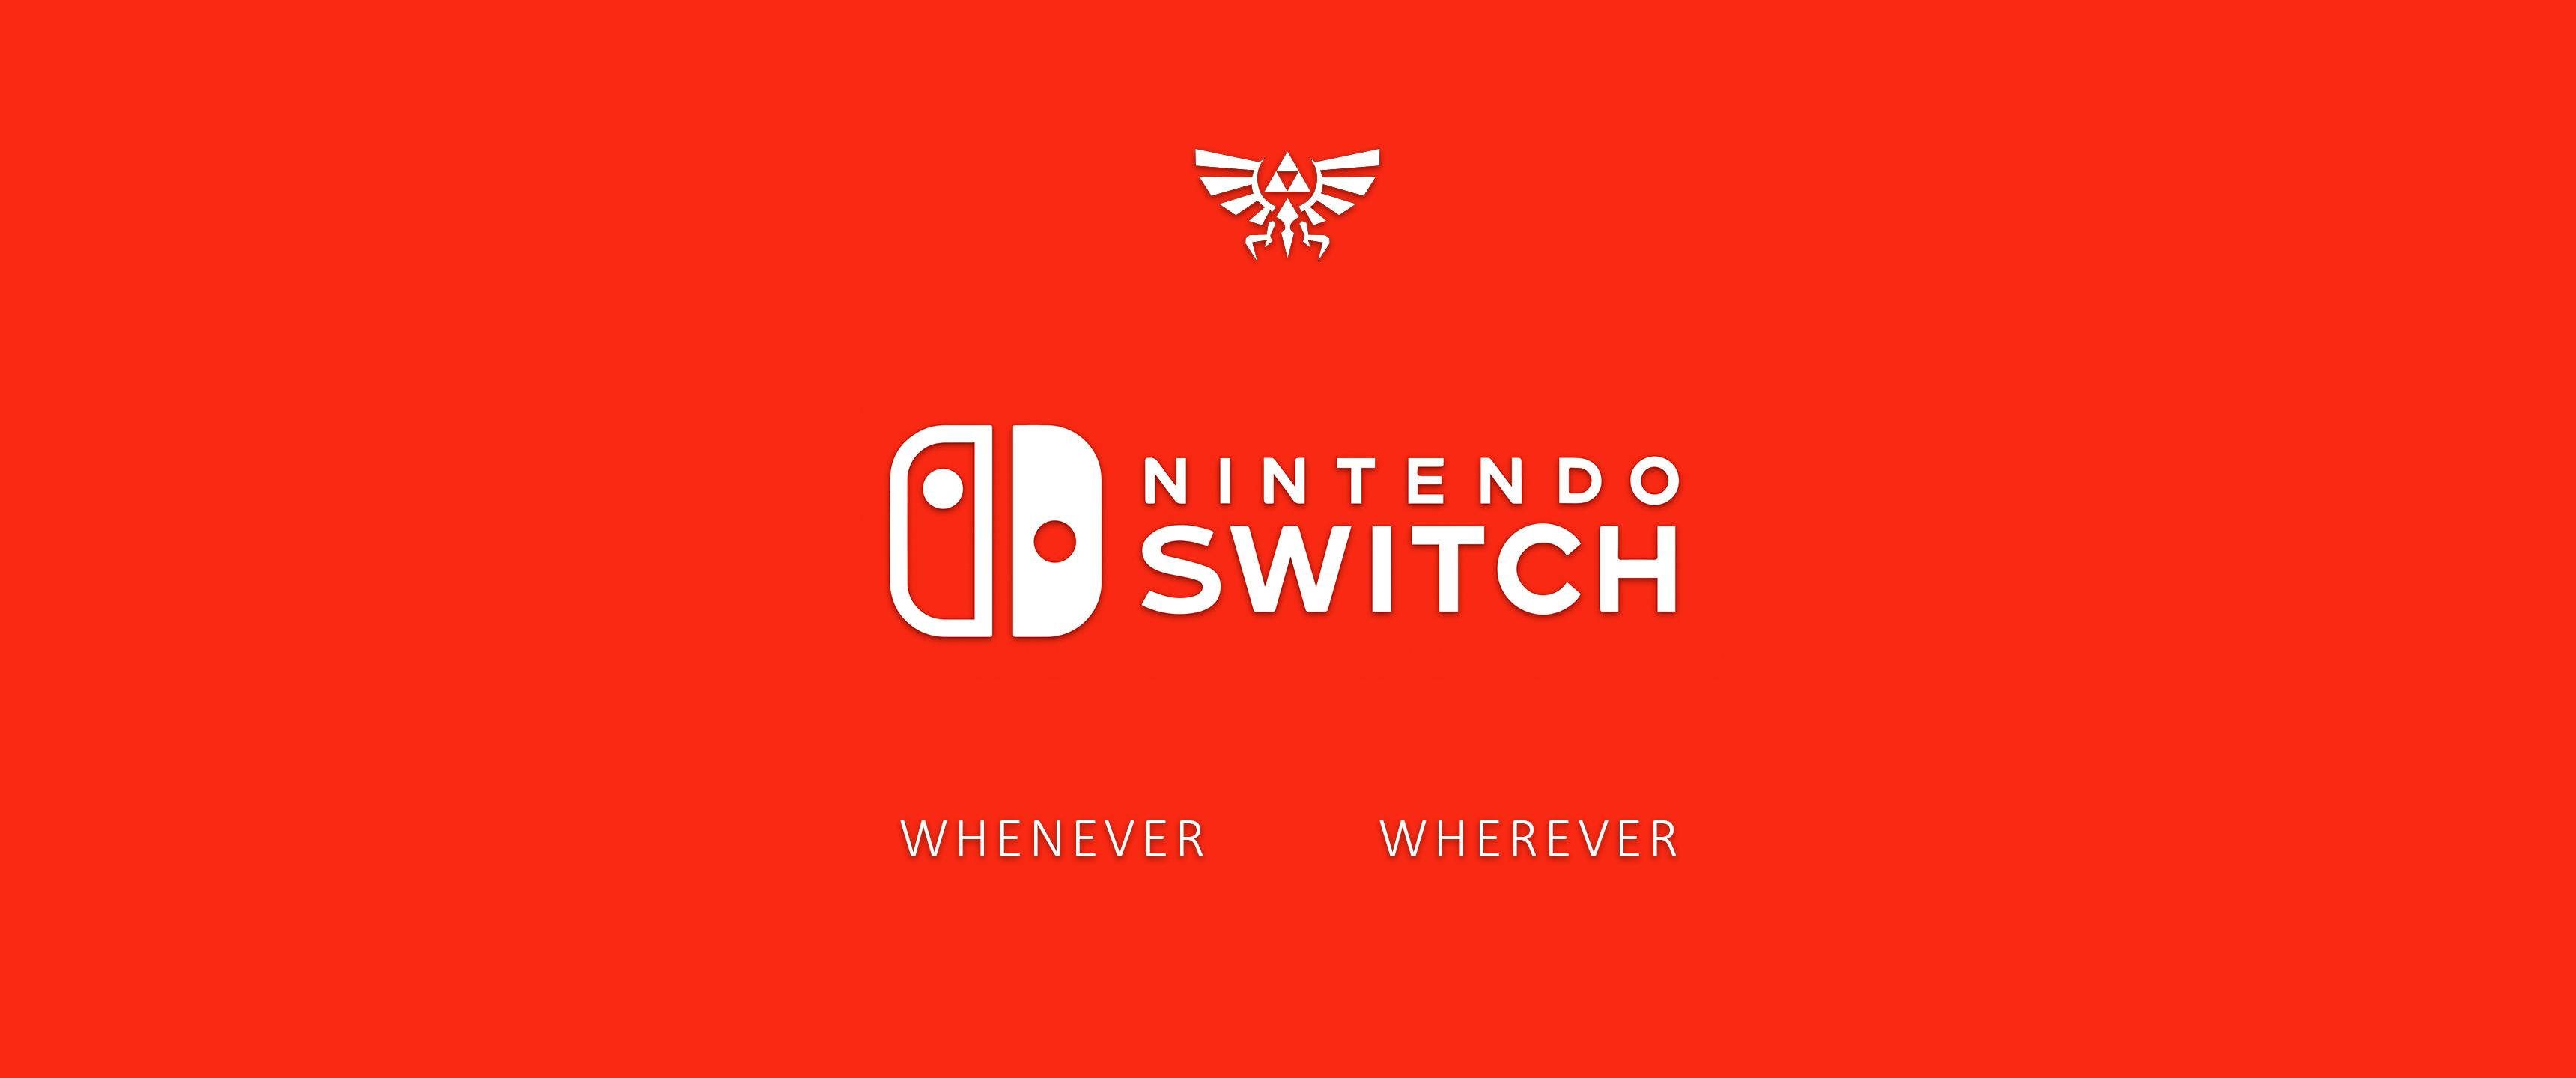 Nintendo Switch Whenever Wherever Background